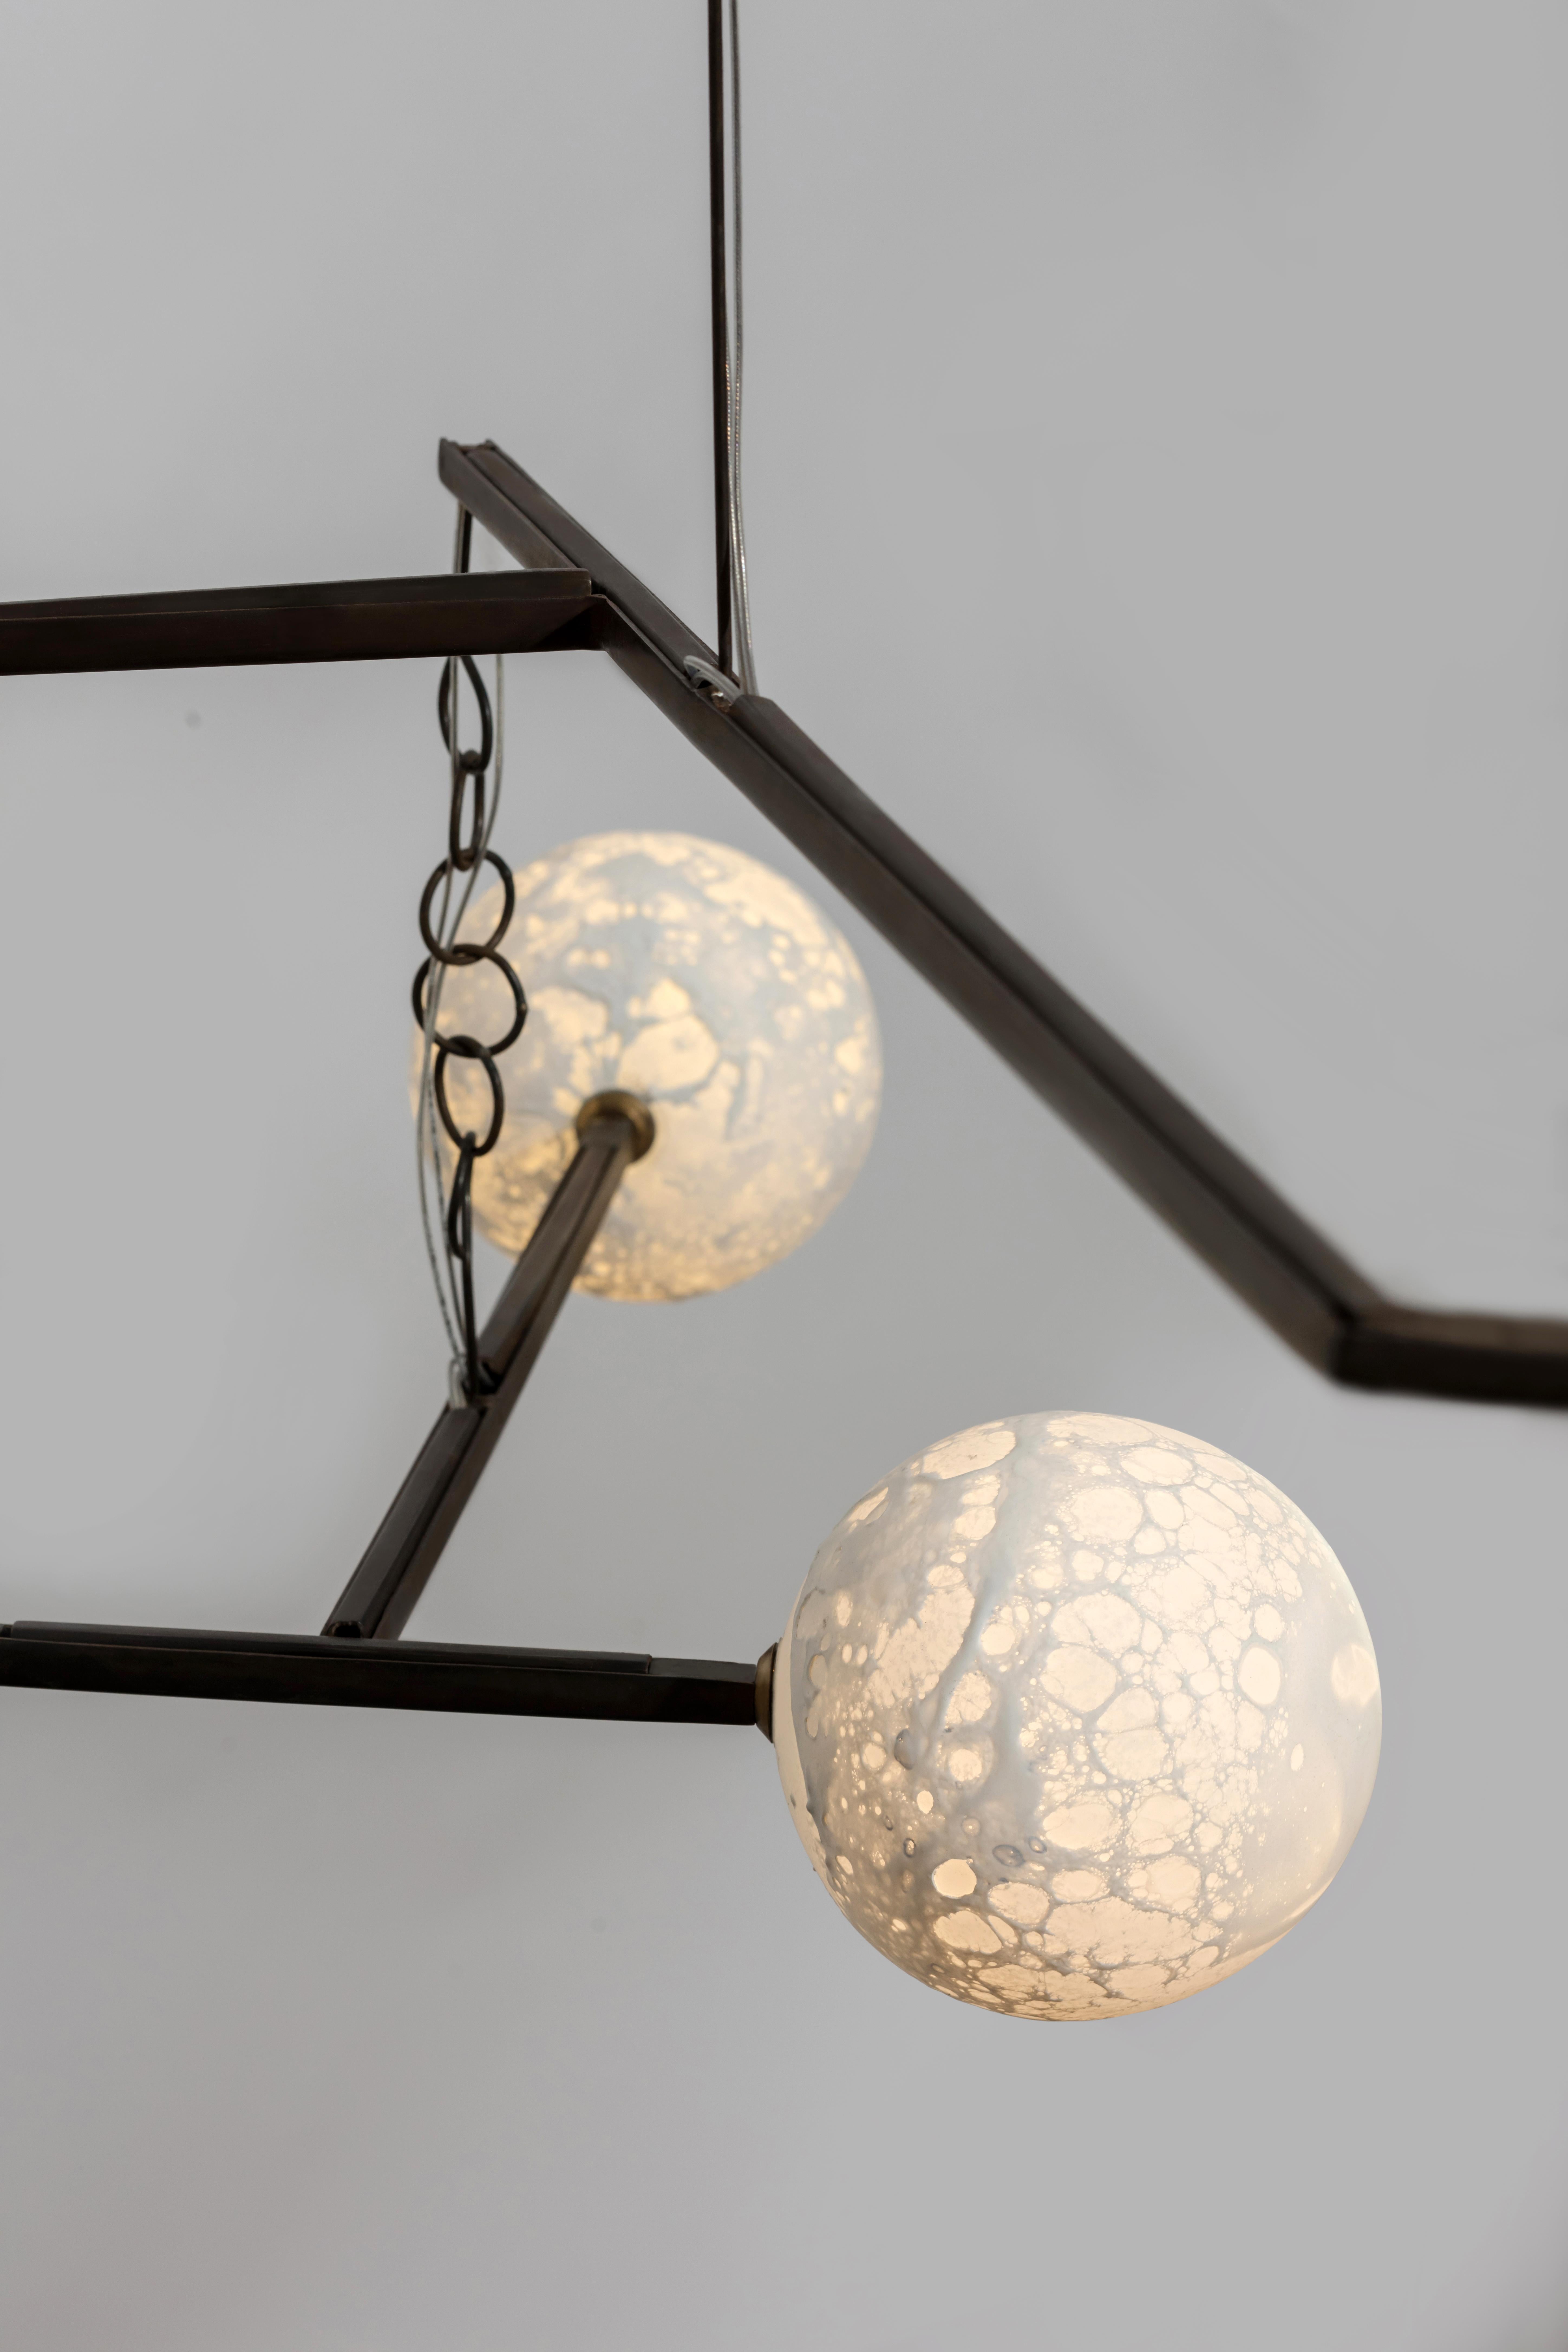 Monumental Moon pendant mobile light - Ludovic Clément d’Armont
Every creation of Ludovic Clément d’Armont can be made to order in any requested dimensions.
Blown glass and metal (can also be made in brass)
Dimensions: 200 x 200 x 200